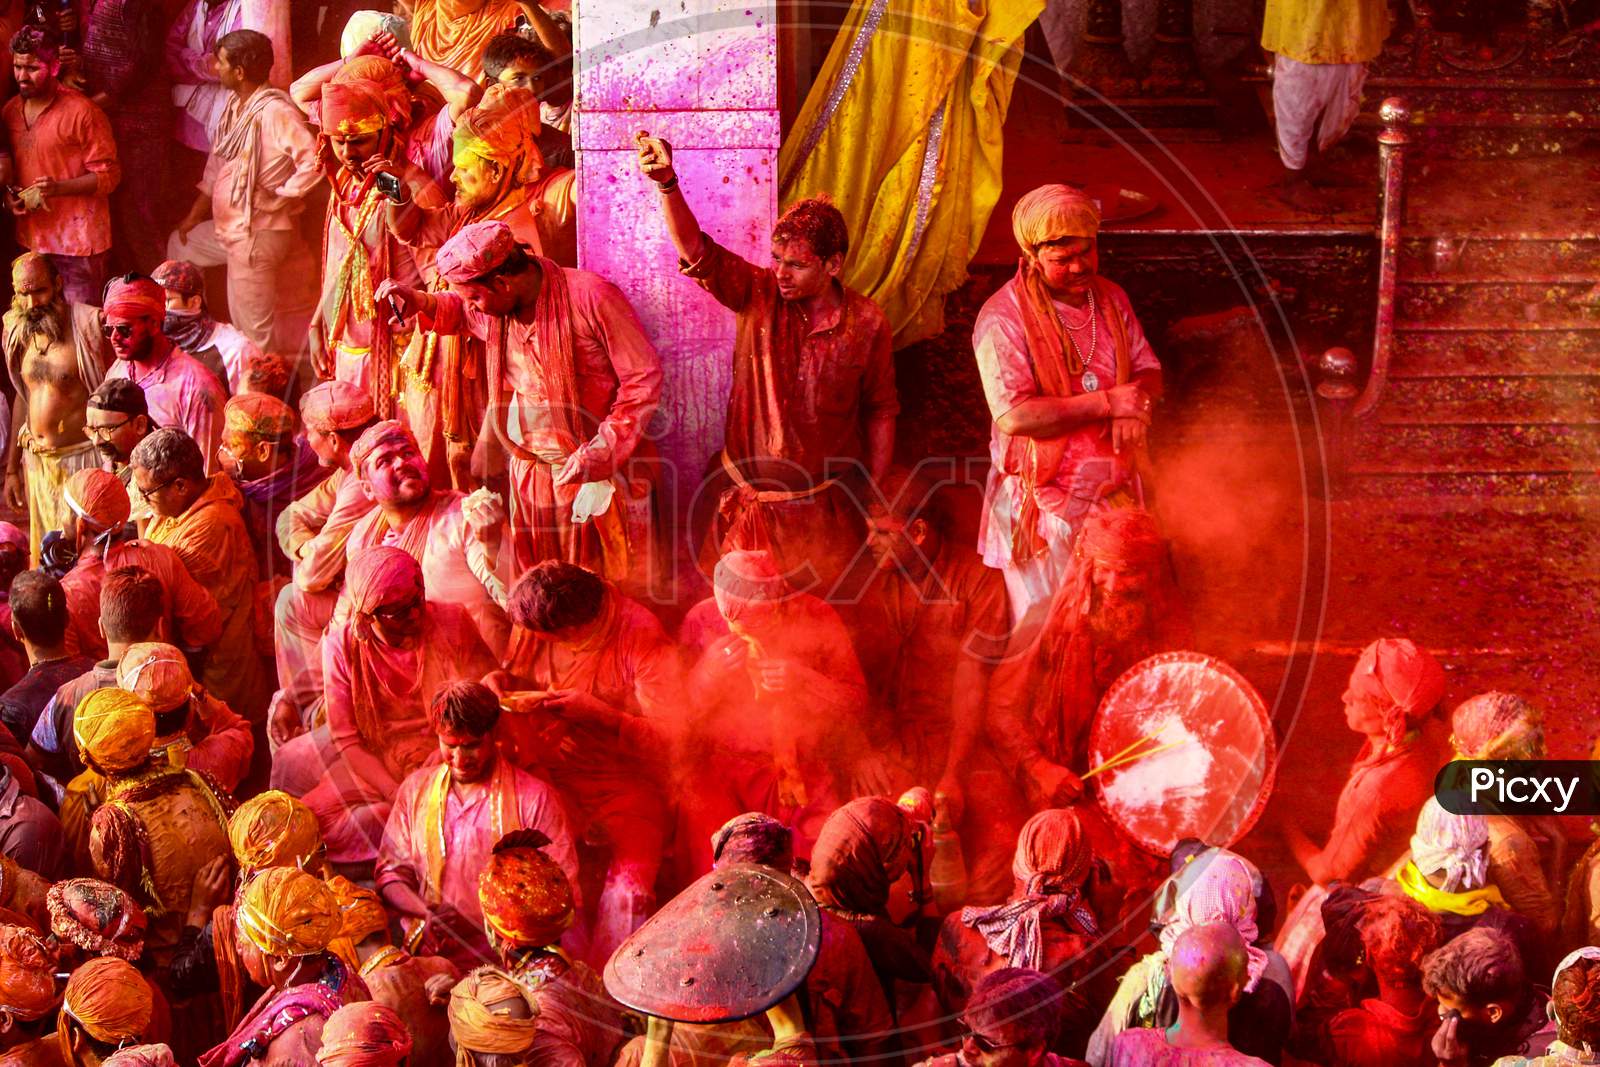 Barsana, Uttar Pradesh, India February 6 2021: People Of India Enjoying The Festival Of Holi By Throwing Colors Onto Each Other. Festive And Colors Concept.